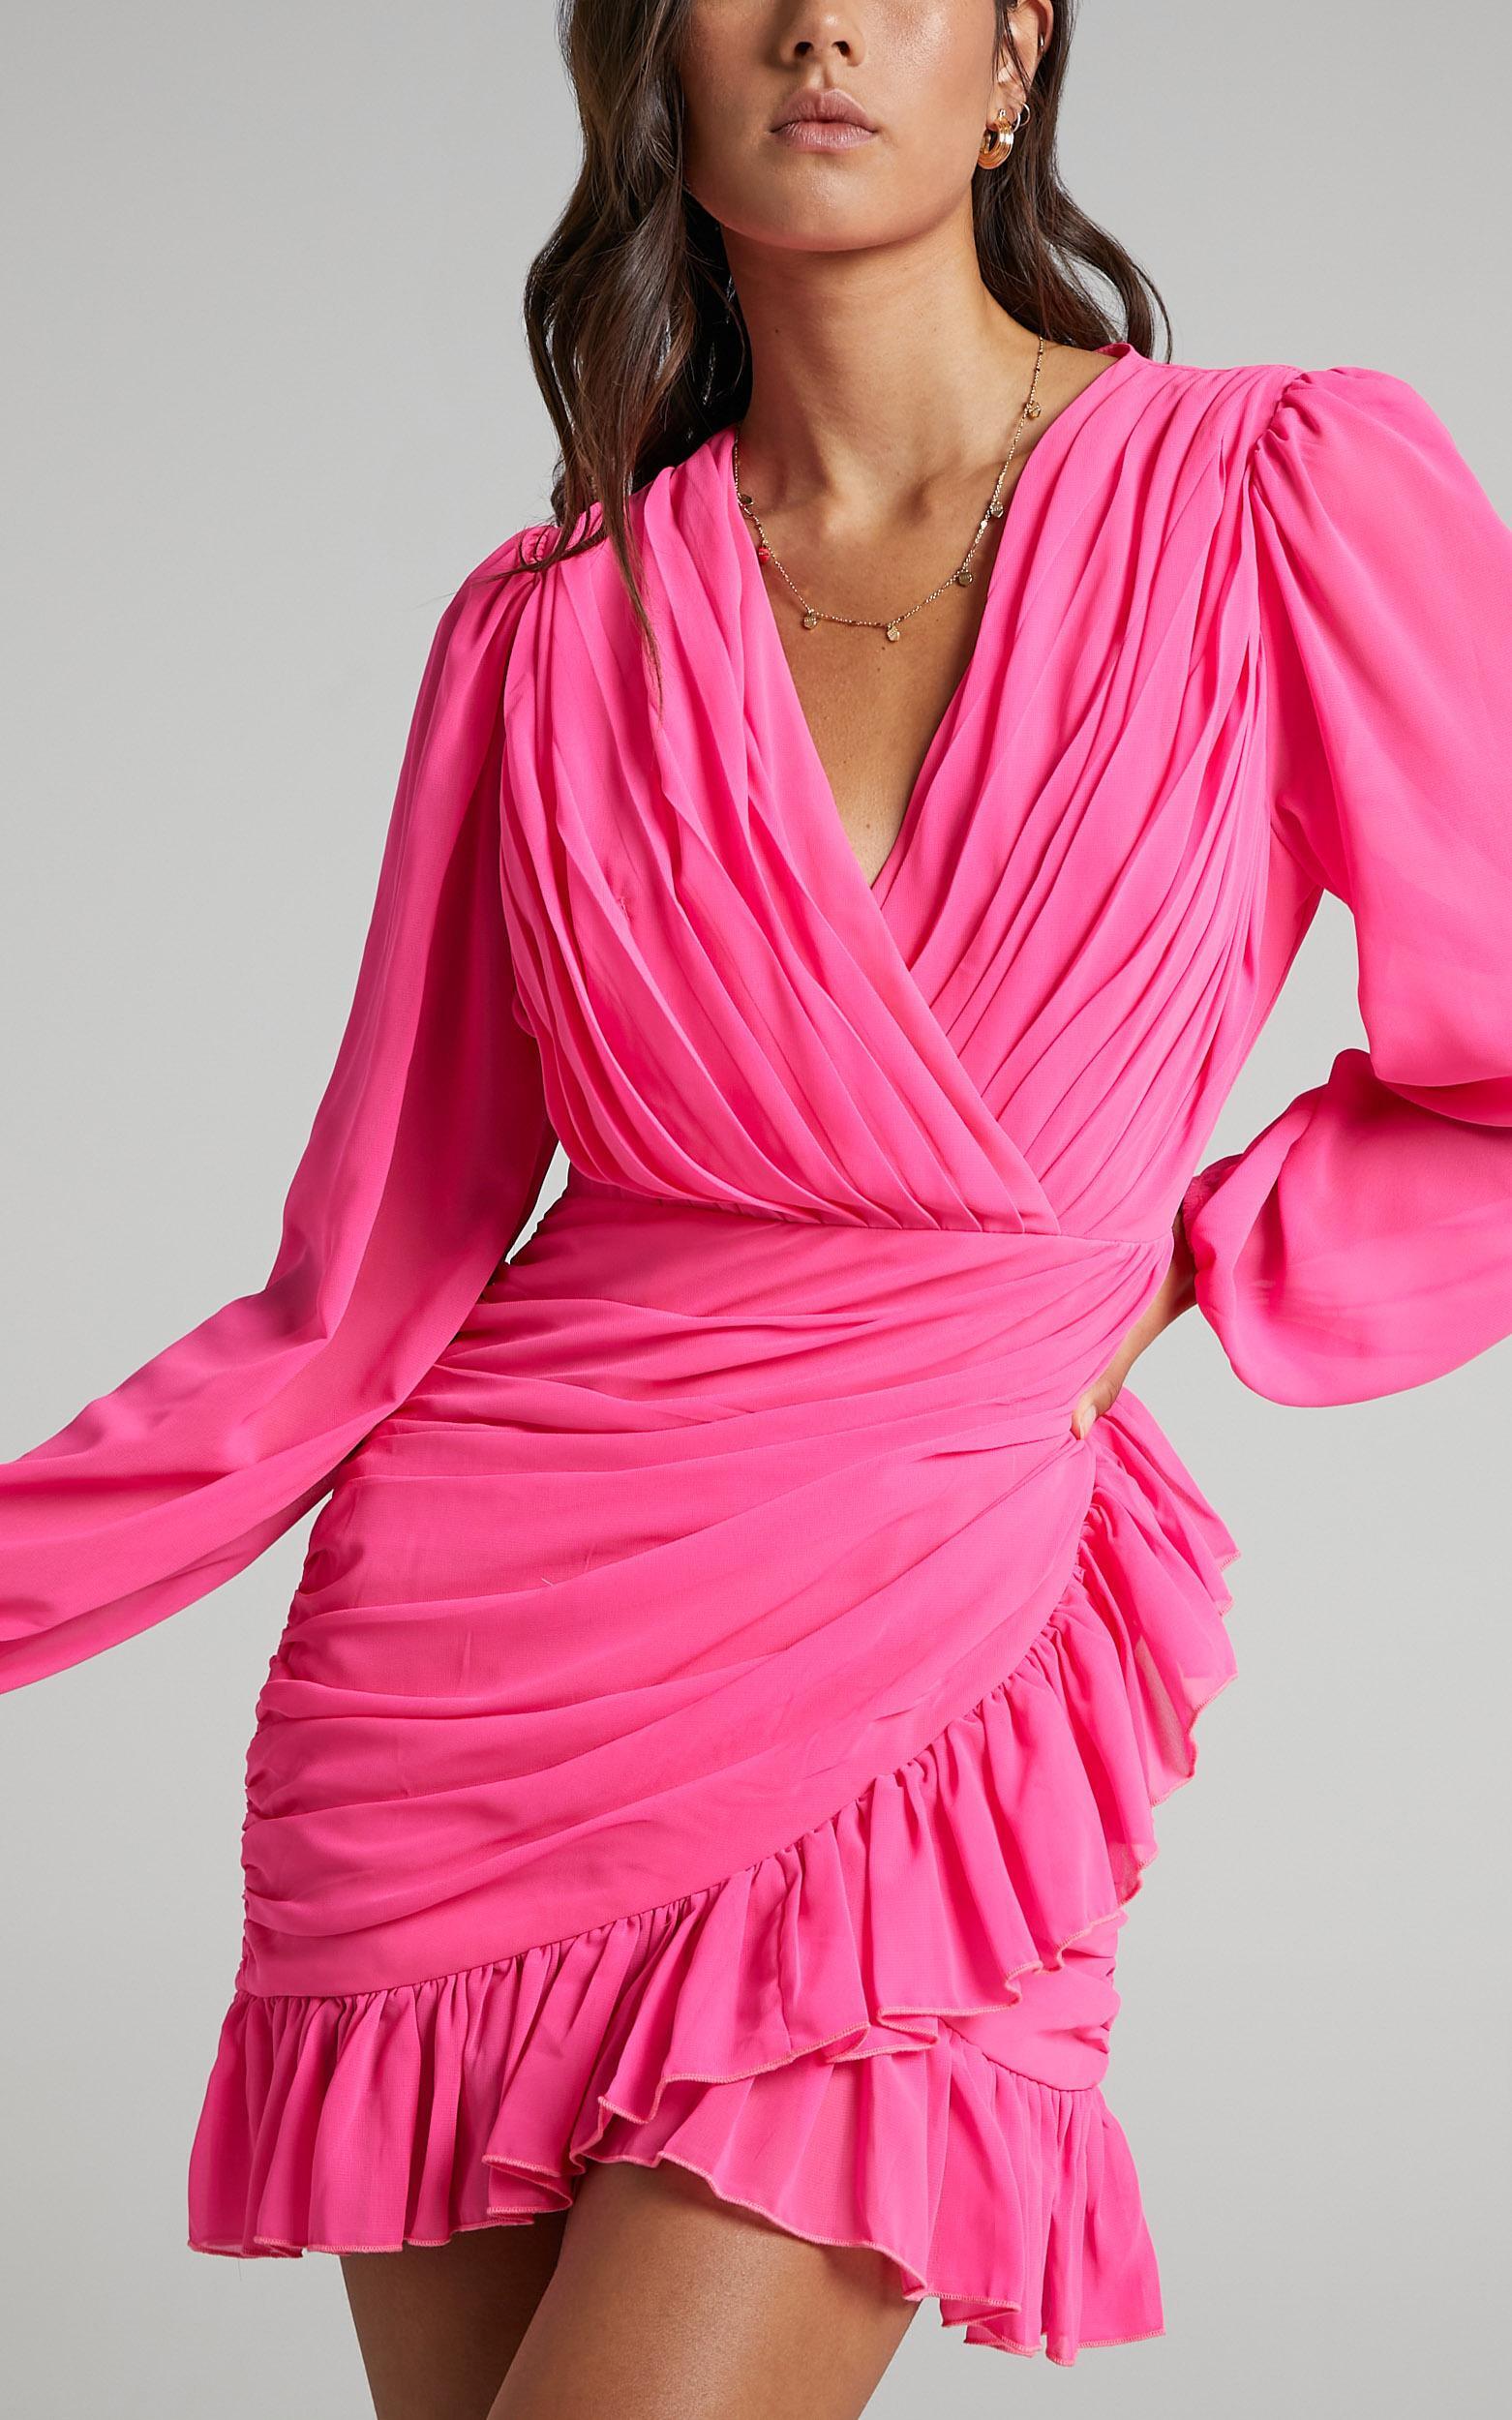 Can I Be Your Honey Plunge Balloon Sleeve Mini Dress in Hot Pink - 10, PNK3, hi-res image number null